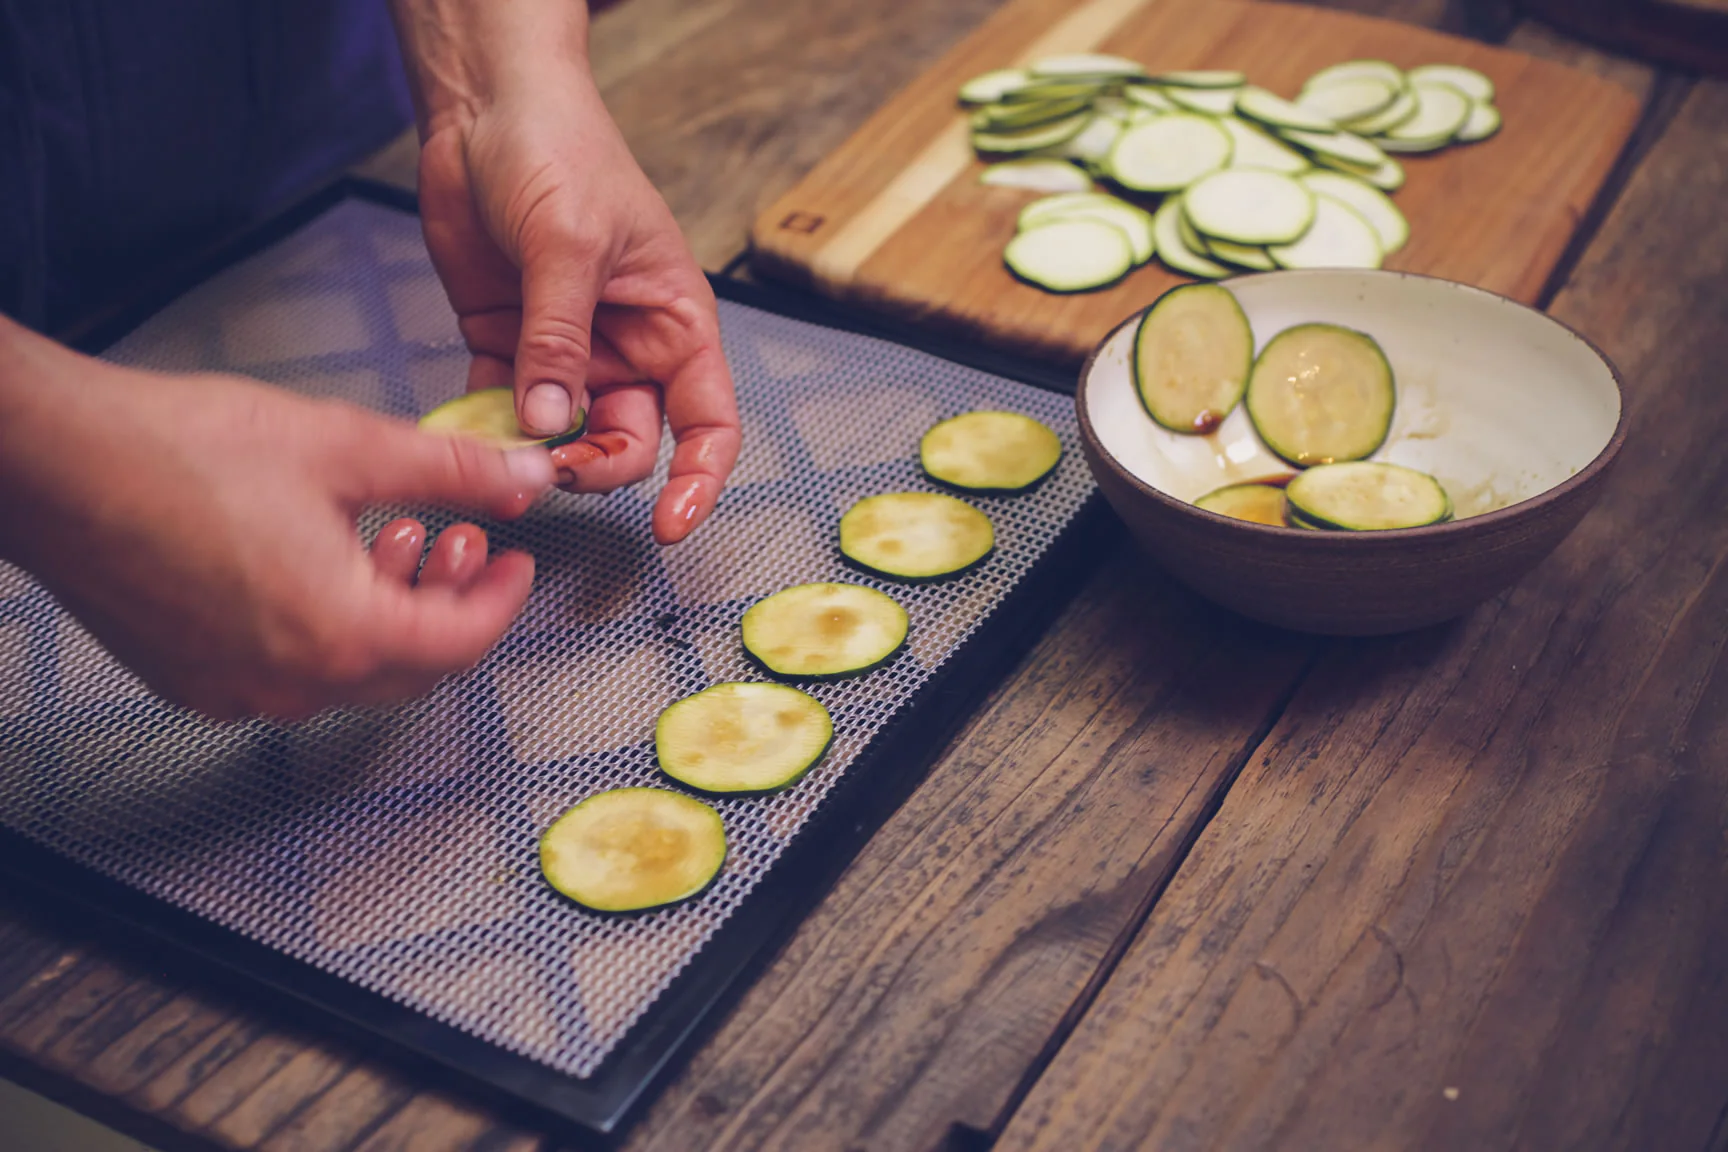 How To Make Zucchini Chips In A Dehydrator